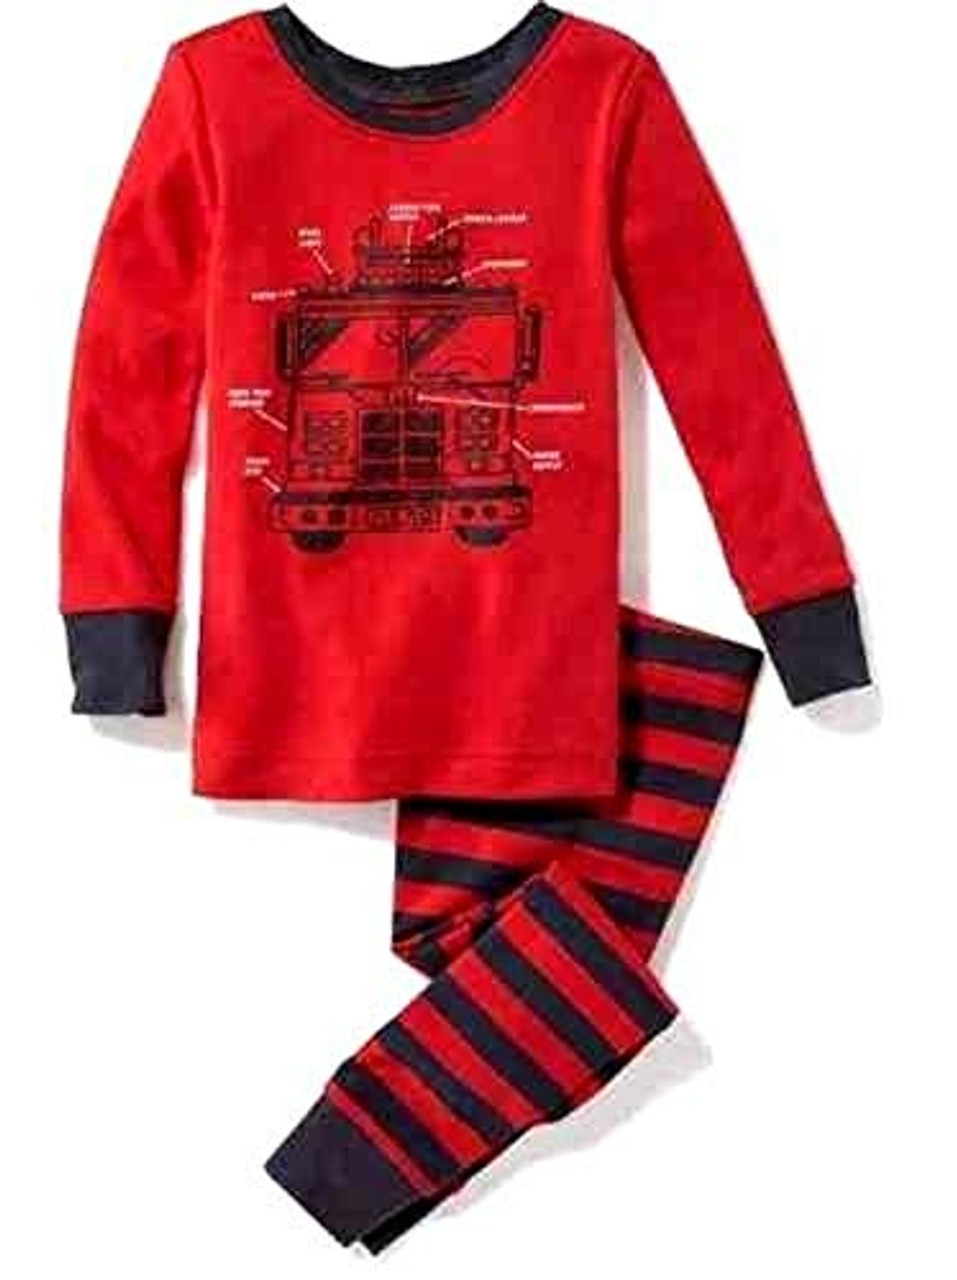 Old Navy Toddler Boy's Fireman Fire Fighter Cotton Pajama Set, Size 3T -  Little Dreamers Pajamas